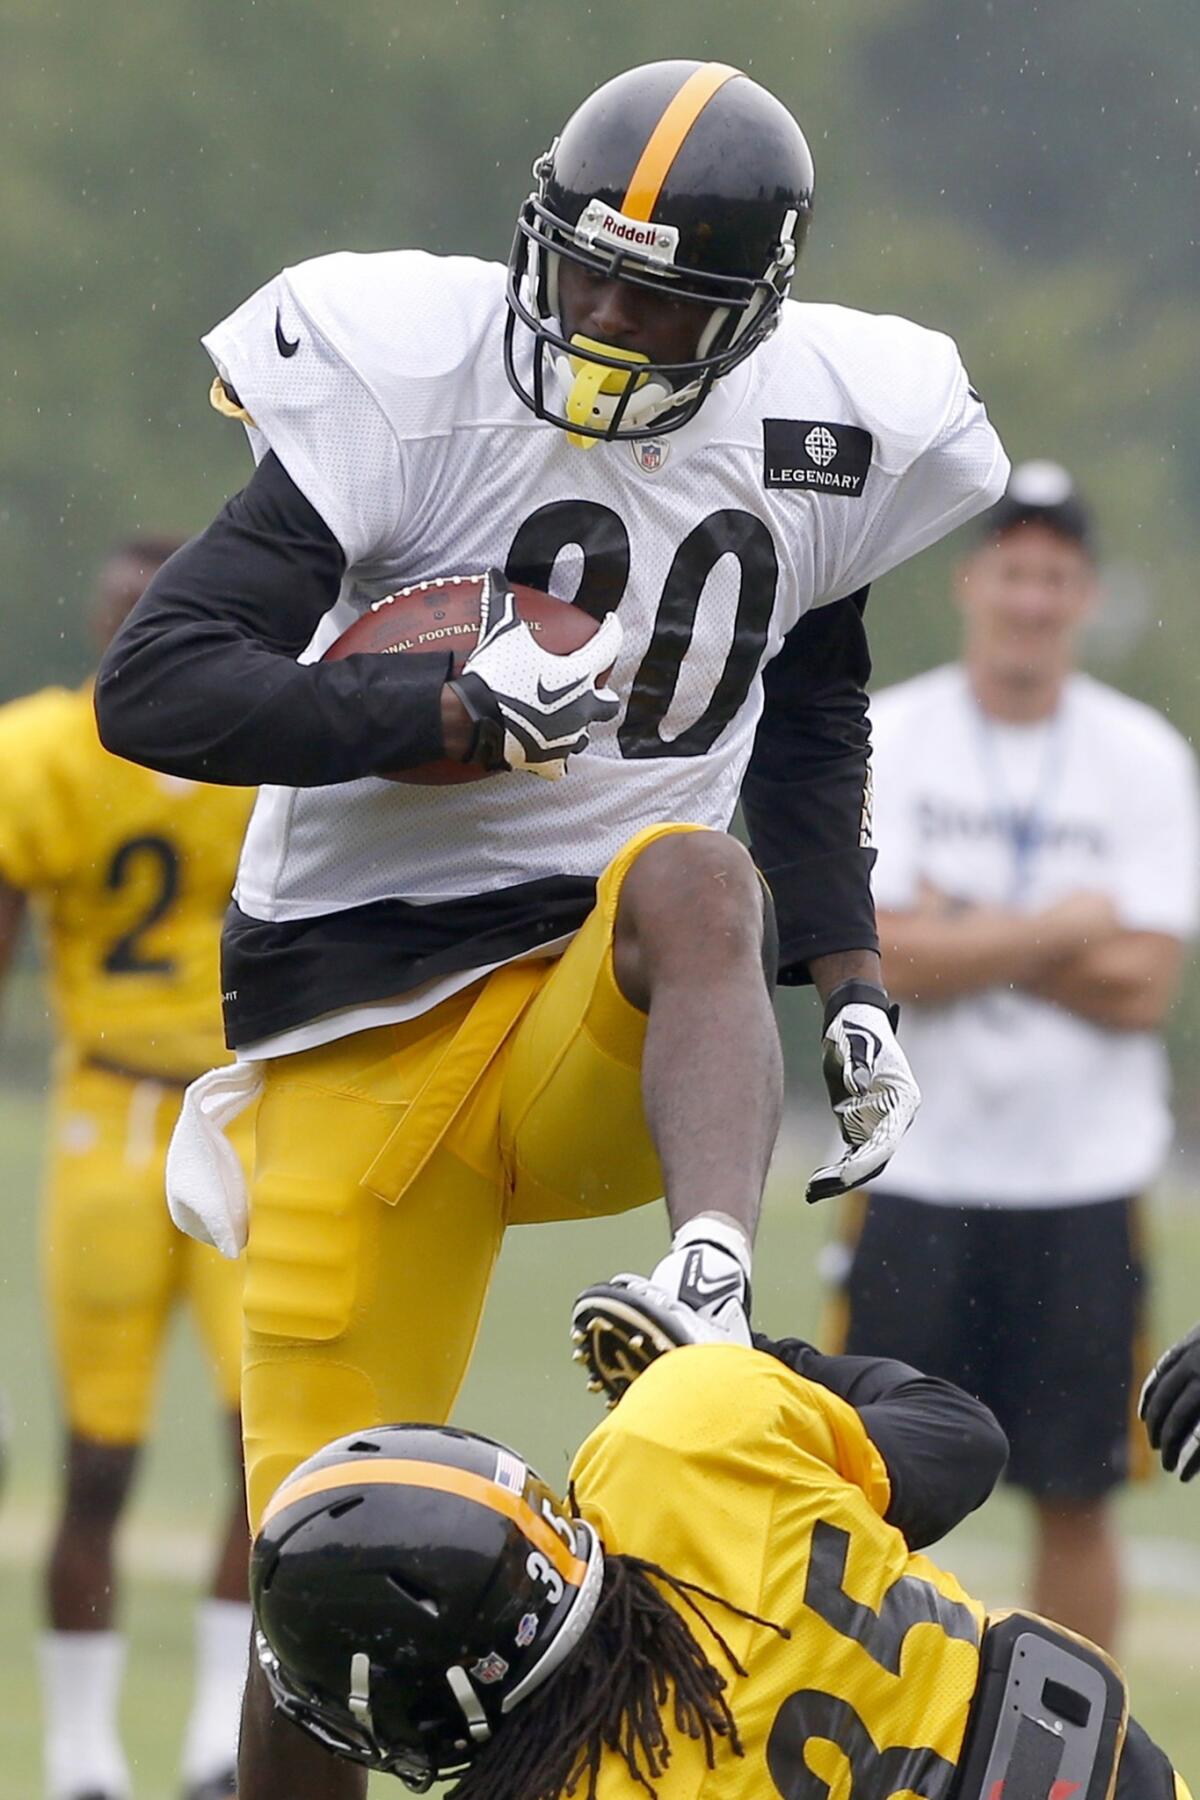 Pittsburgh Steelers wide receiver Plaxico Burress injured his shoulder while trying to catch a pass in practice Thursday.